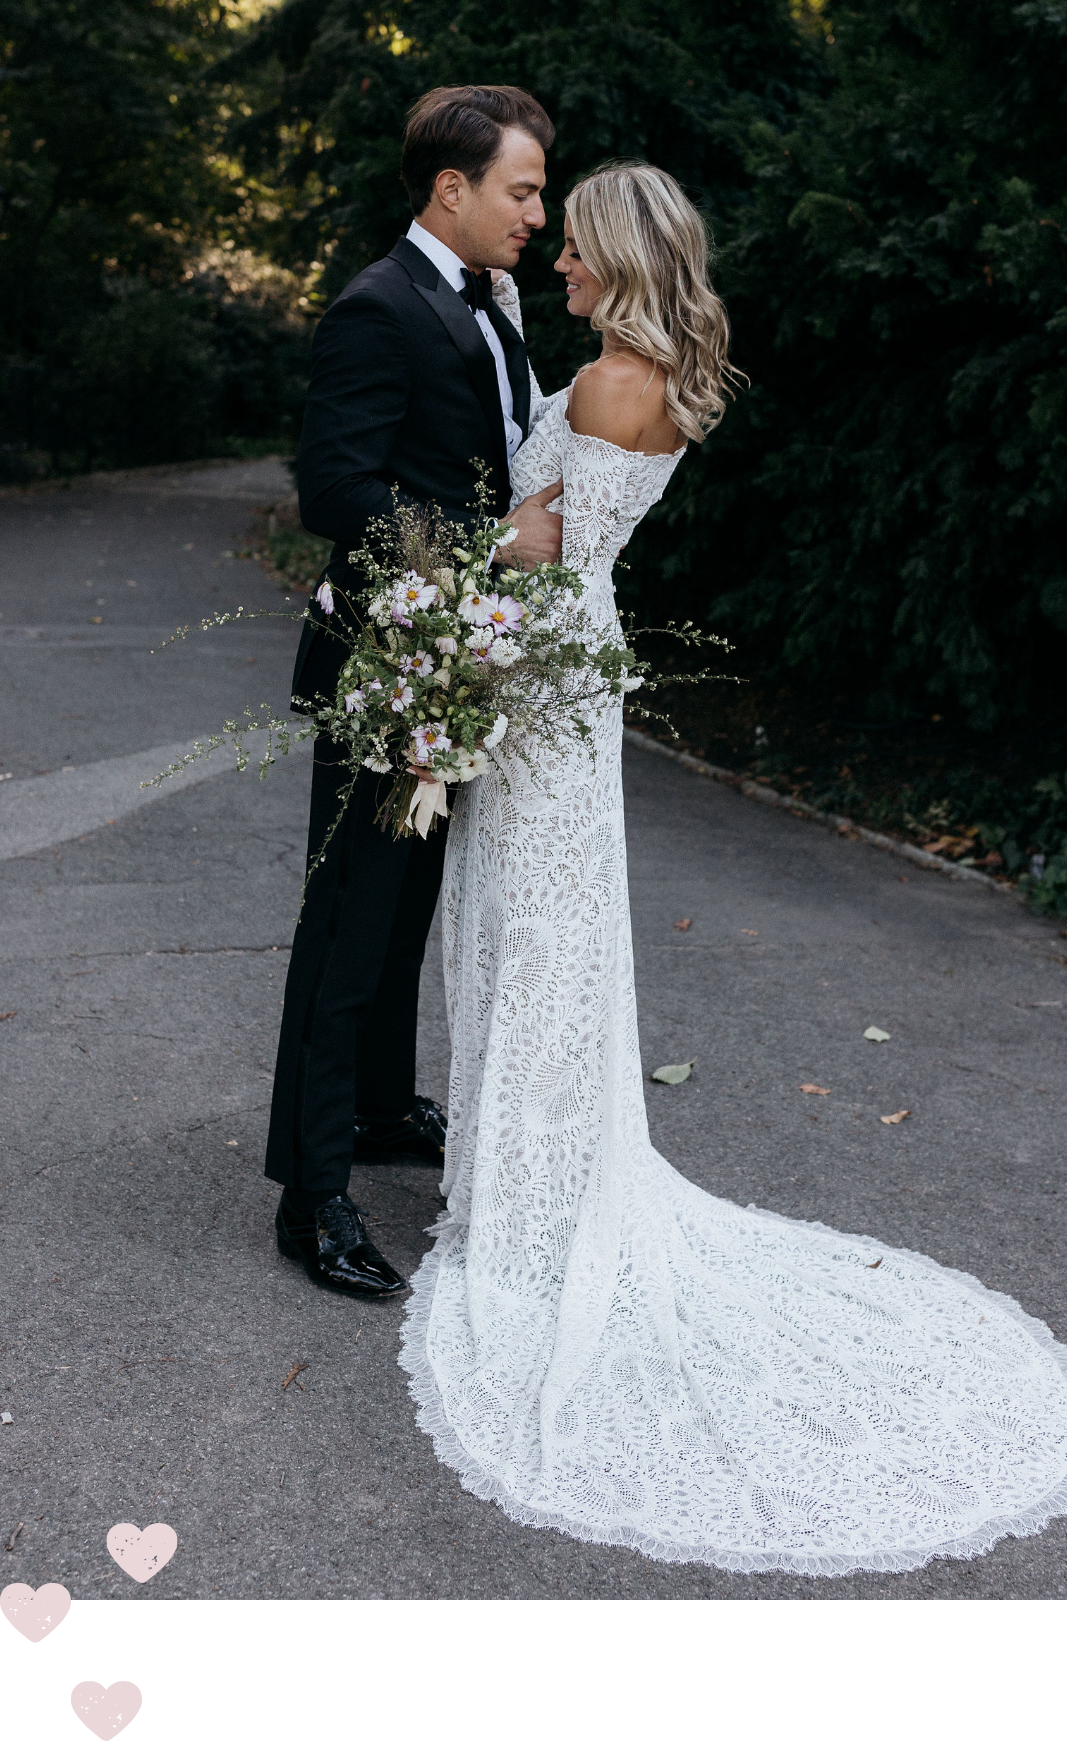 Bride wearing Nathalia Gown by Grace Loves Lace